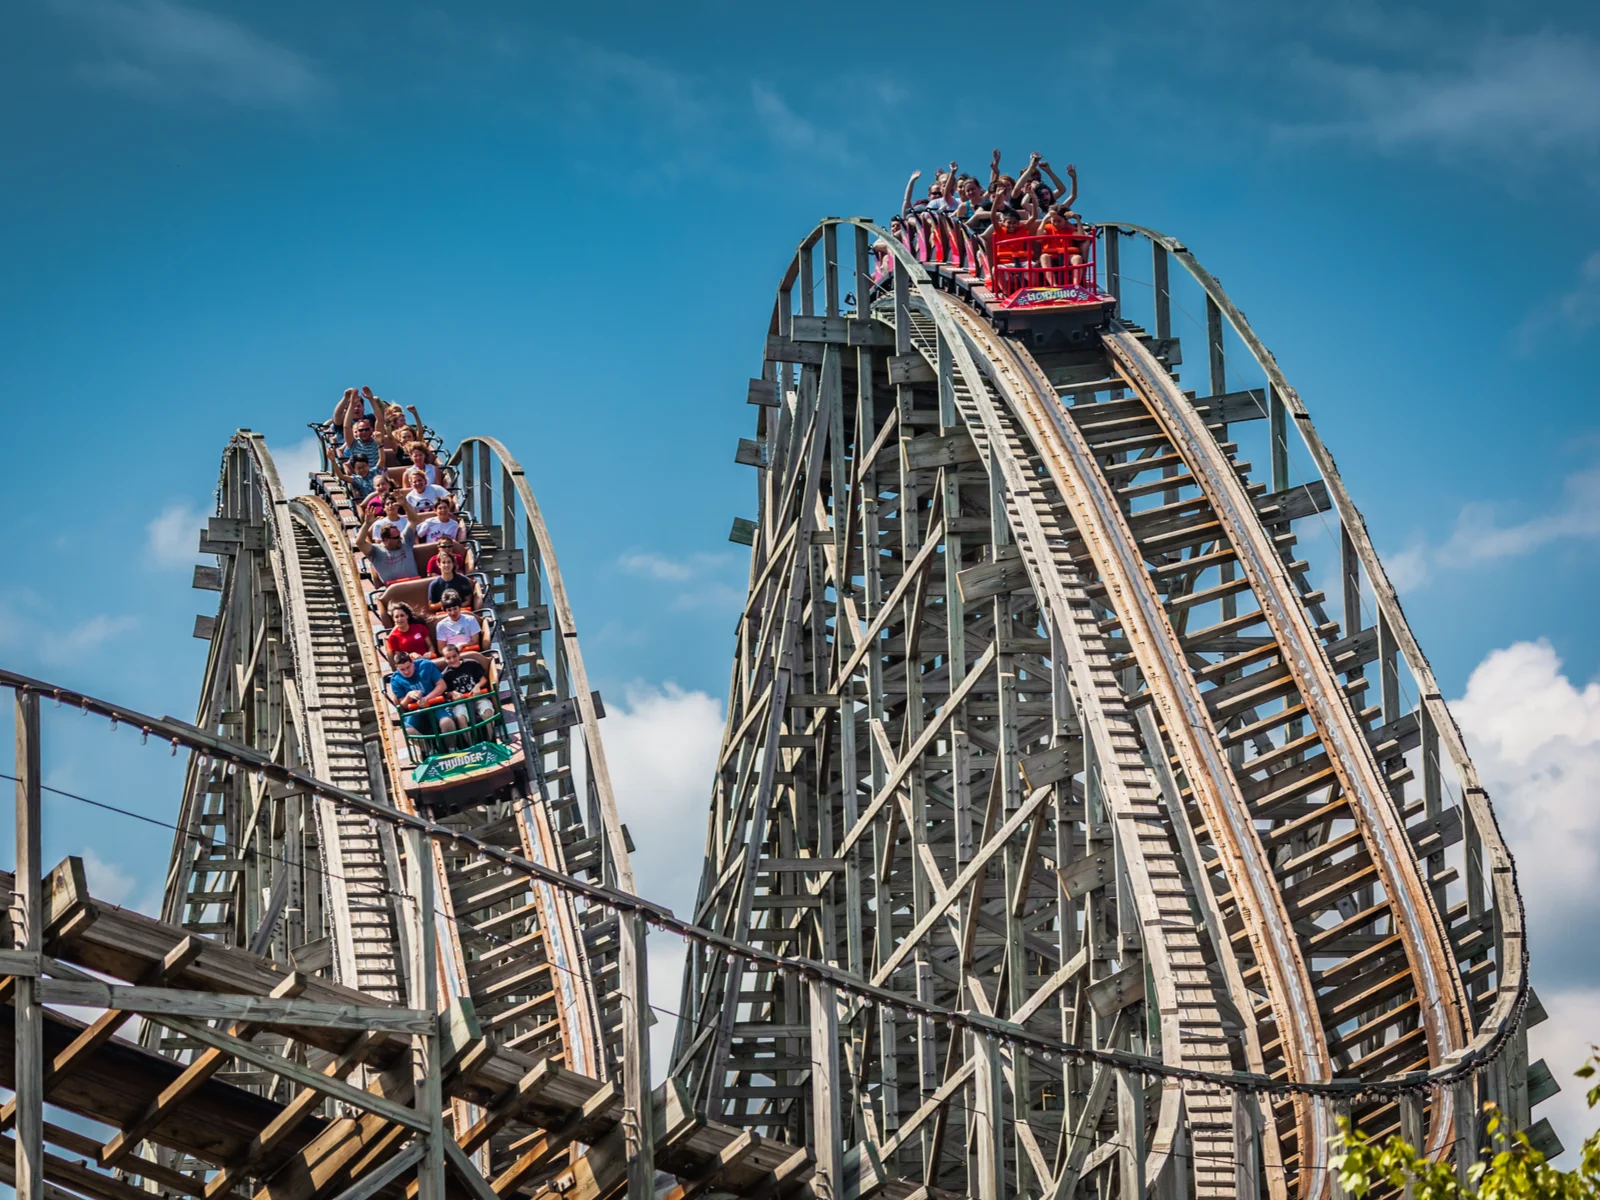 Children and Adults are ecstatic as they ride the double-track dueling wooden Lightning Racer at Hersheypark in Hershey, Pennsylvania, one of the best roller coaster parks in the US